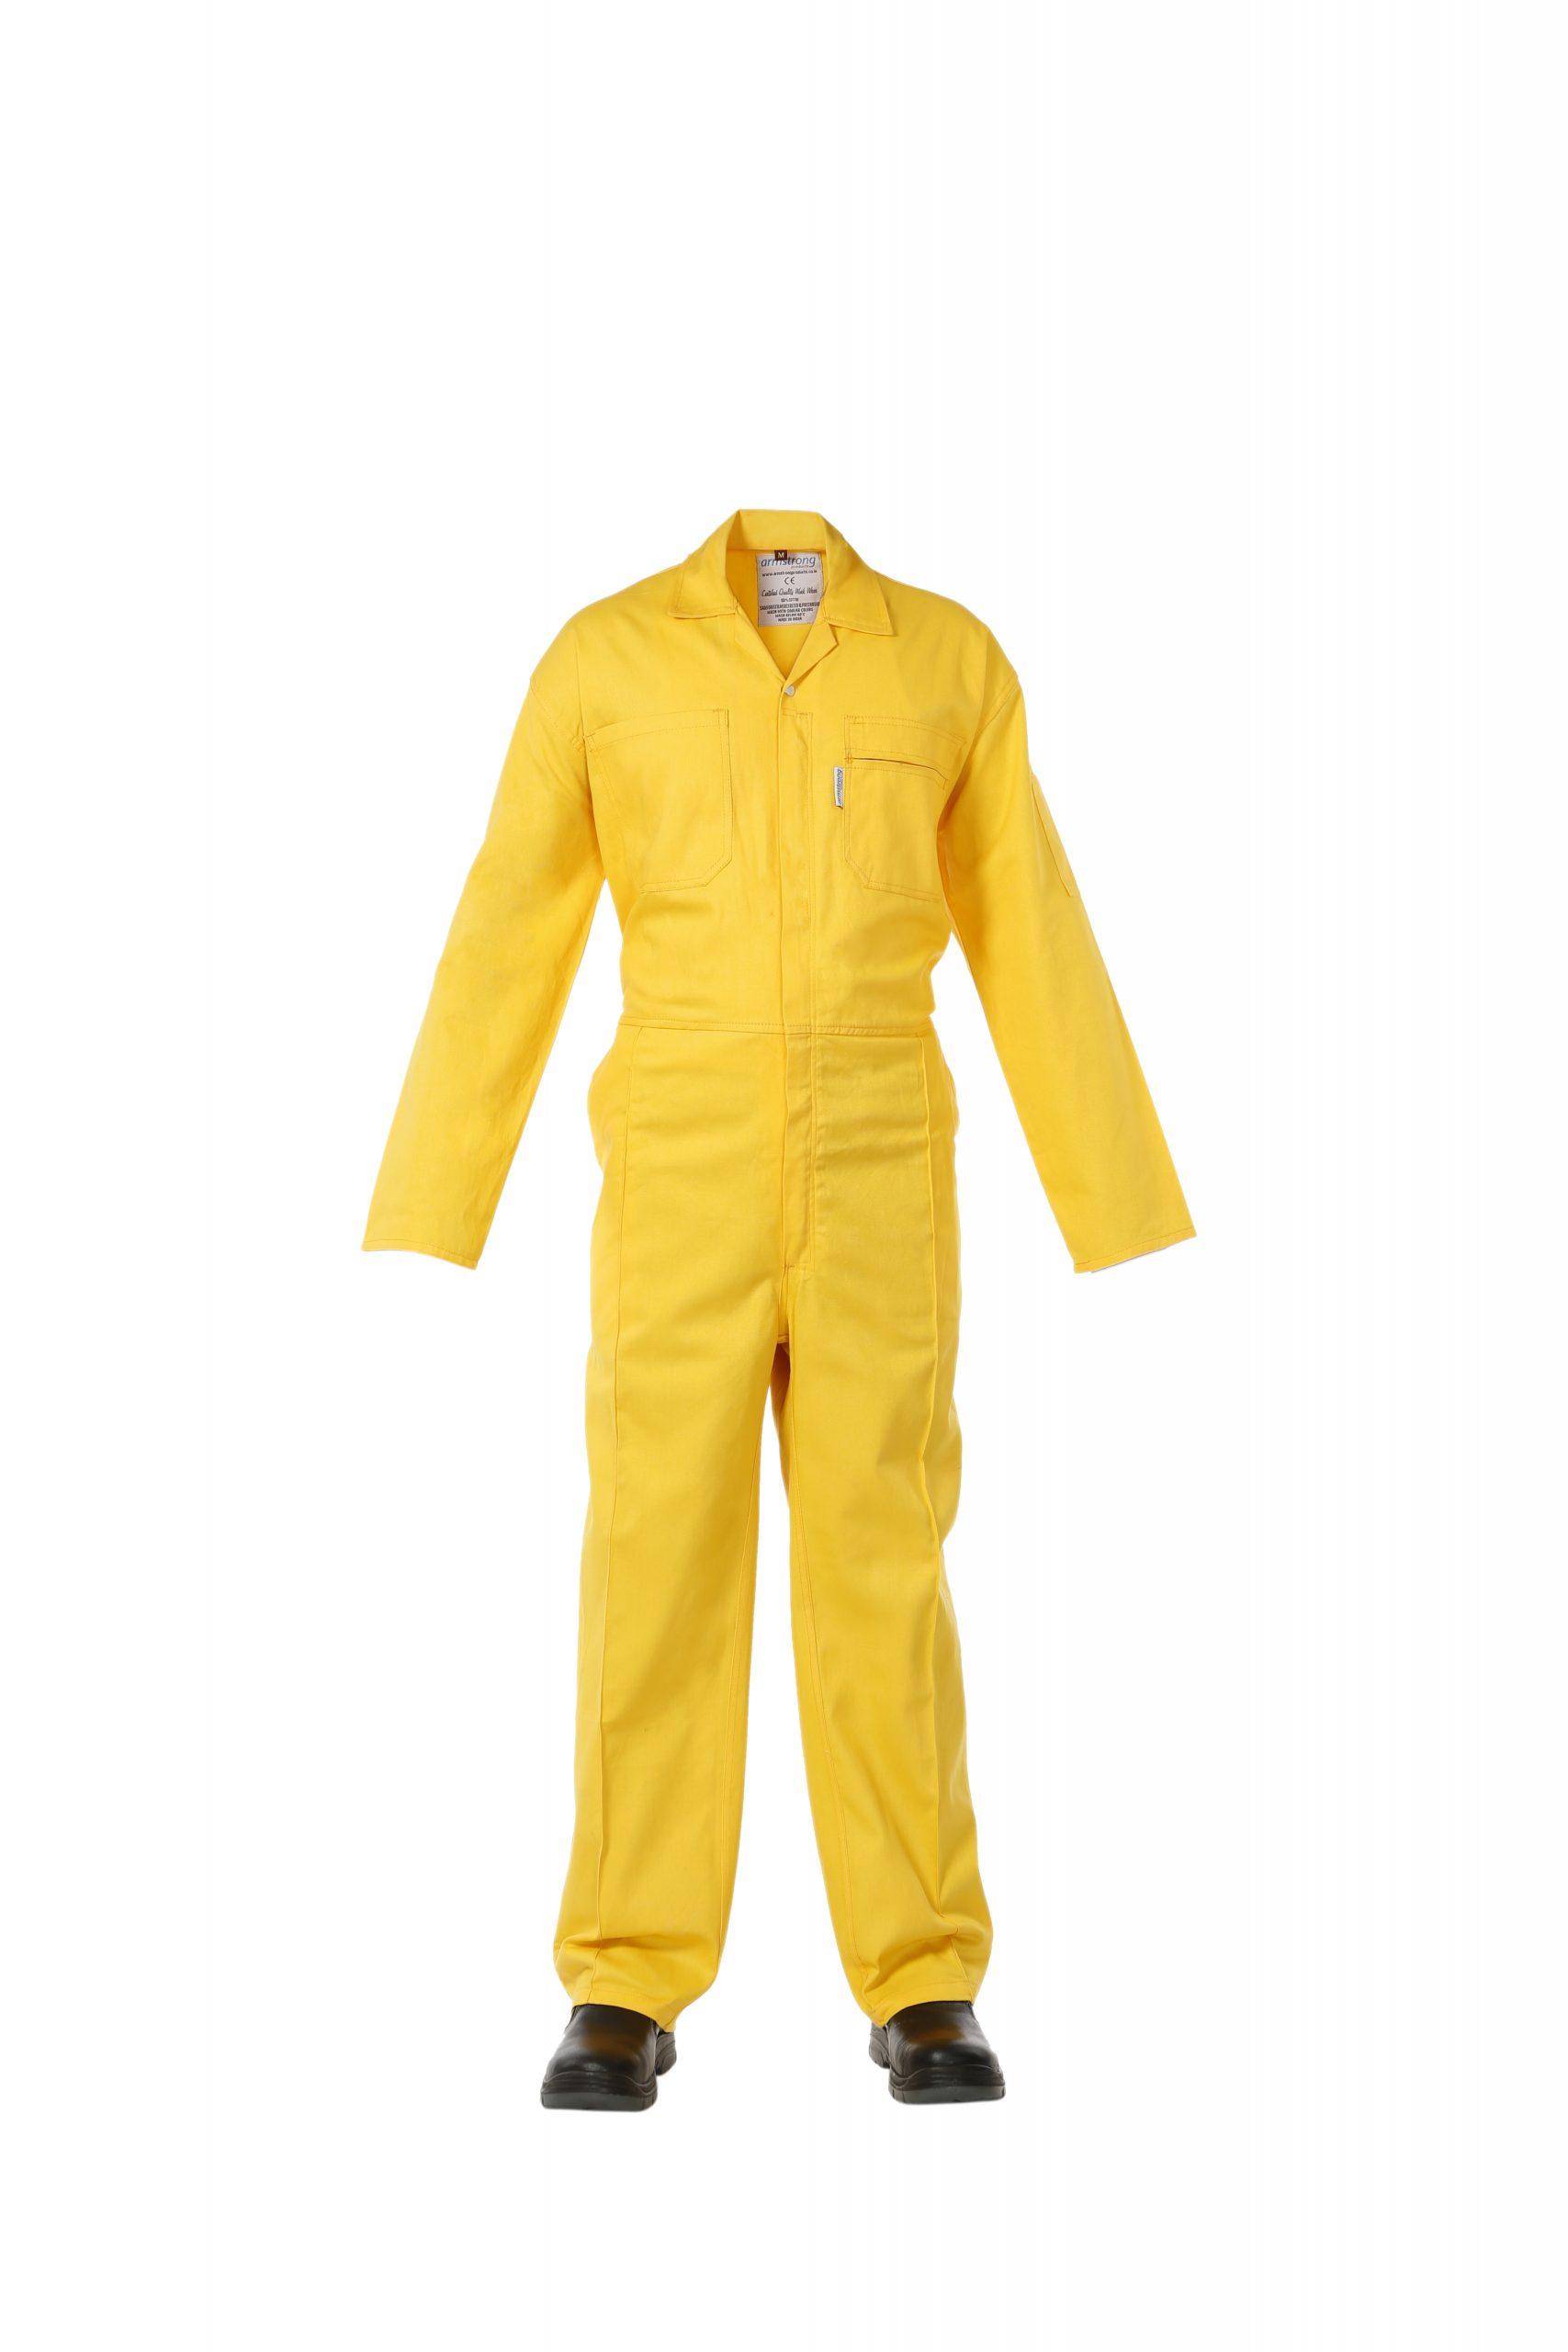 DuPont Yellow Tychem QC Coverall w/ Hood, Boots, Elastic Wrists - 12 PACK